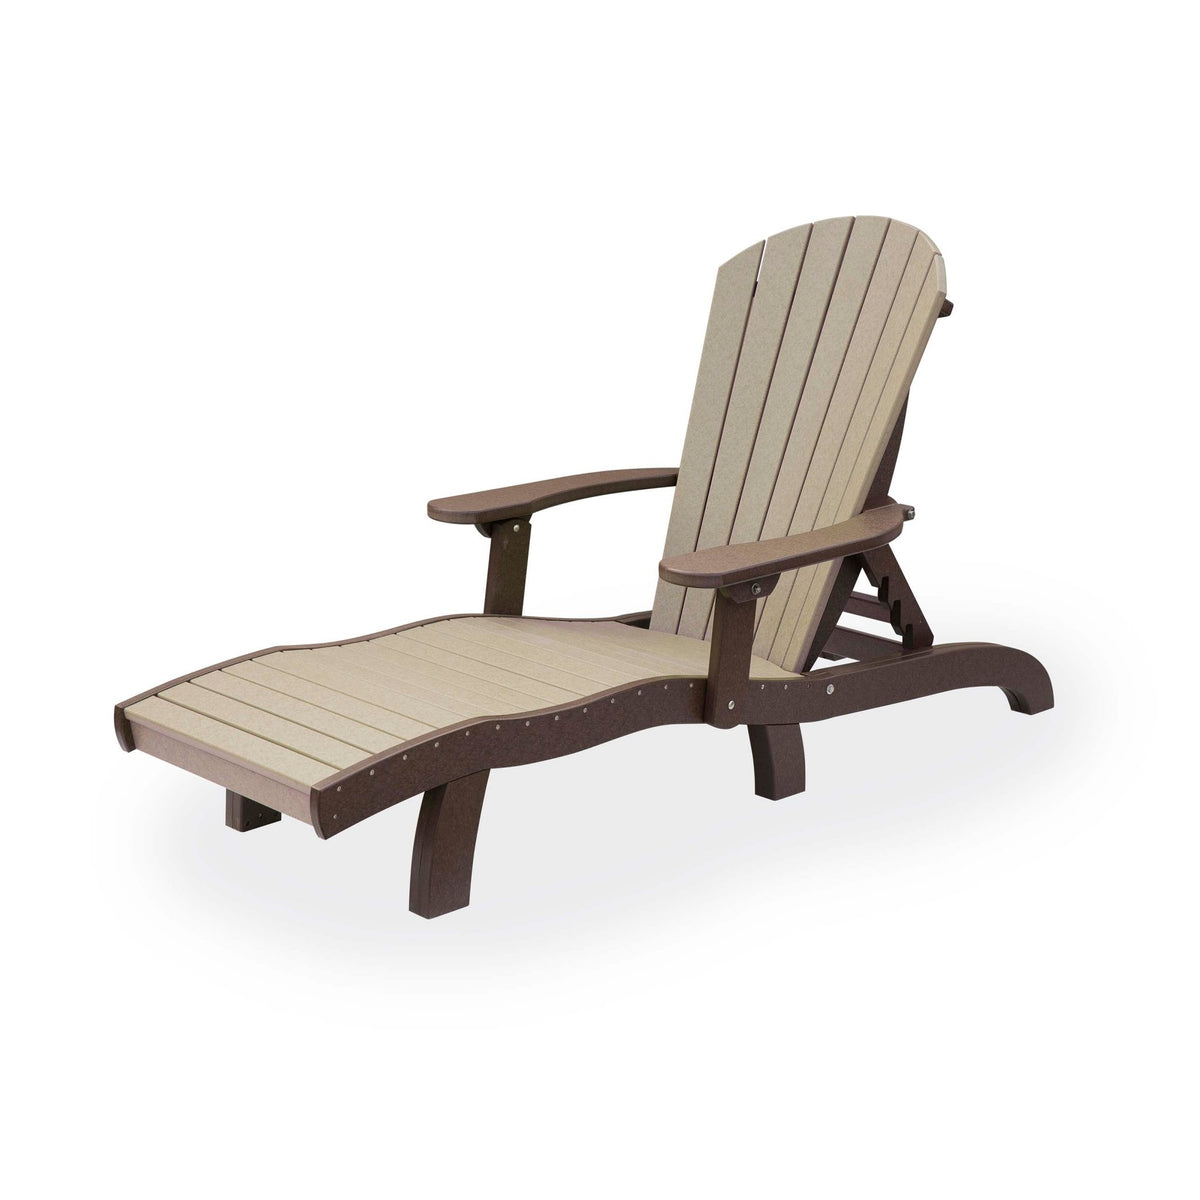 SeaAira Lounge Chair - snyders.furniture